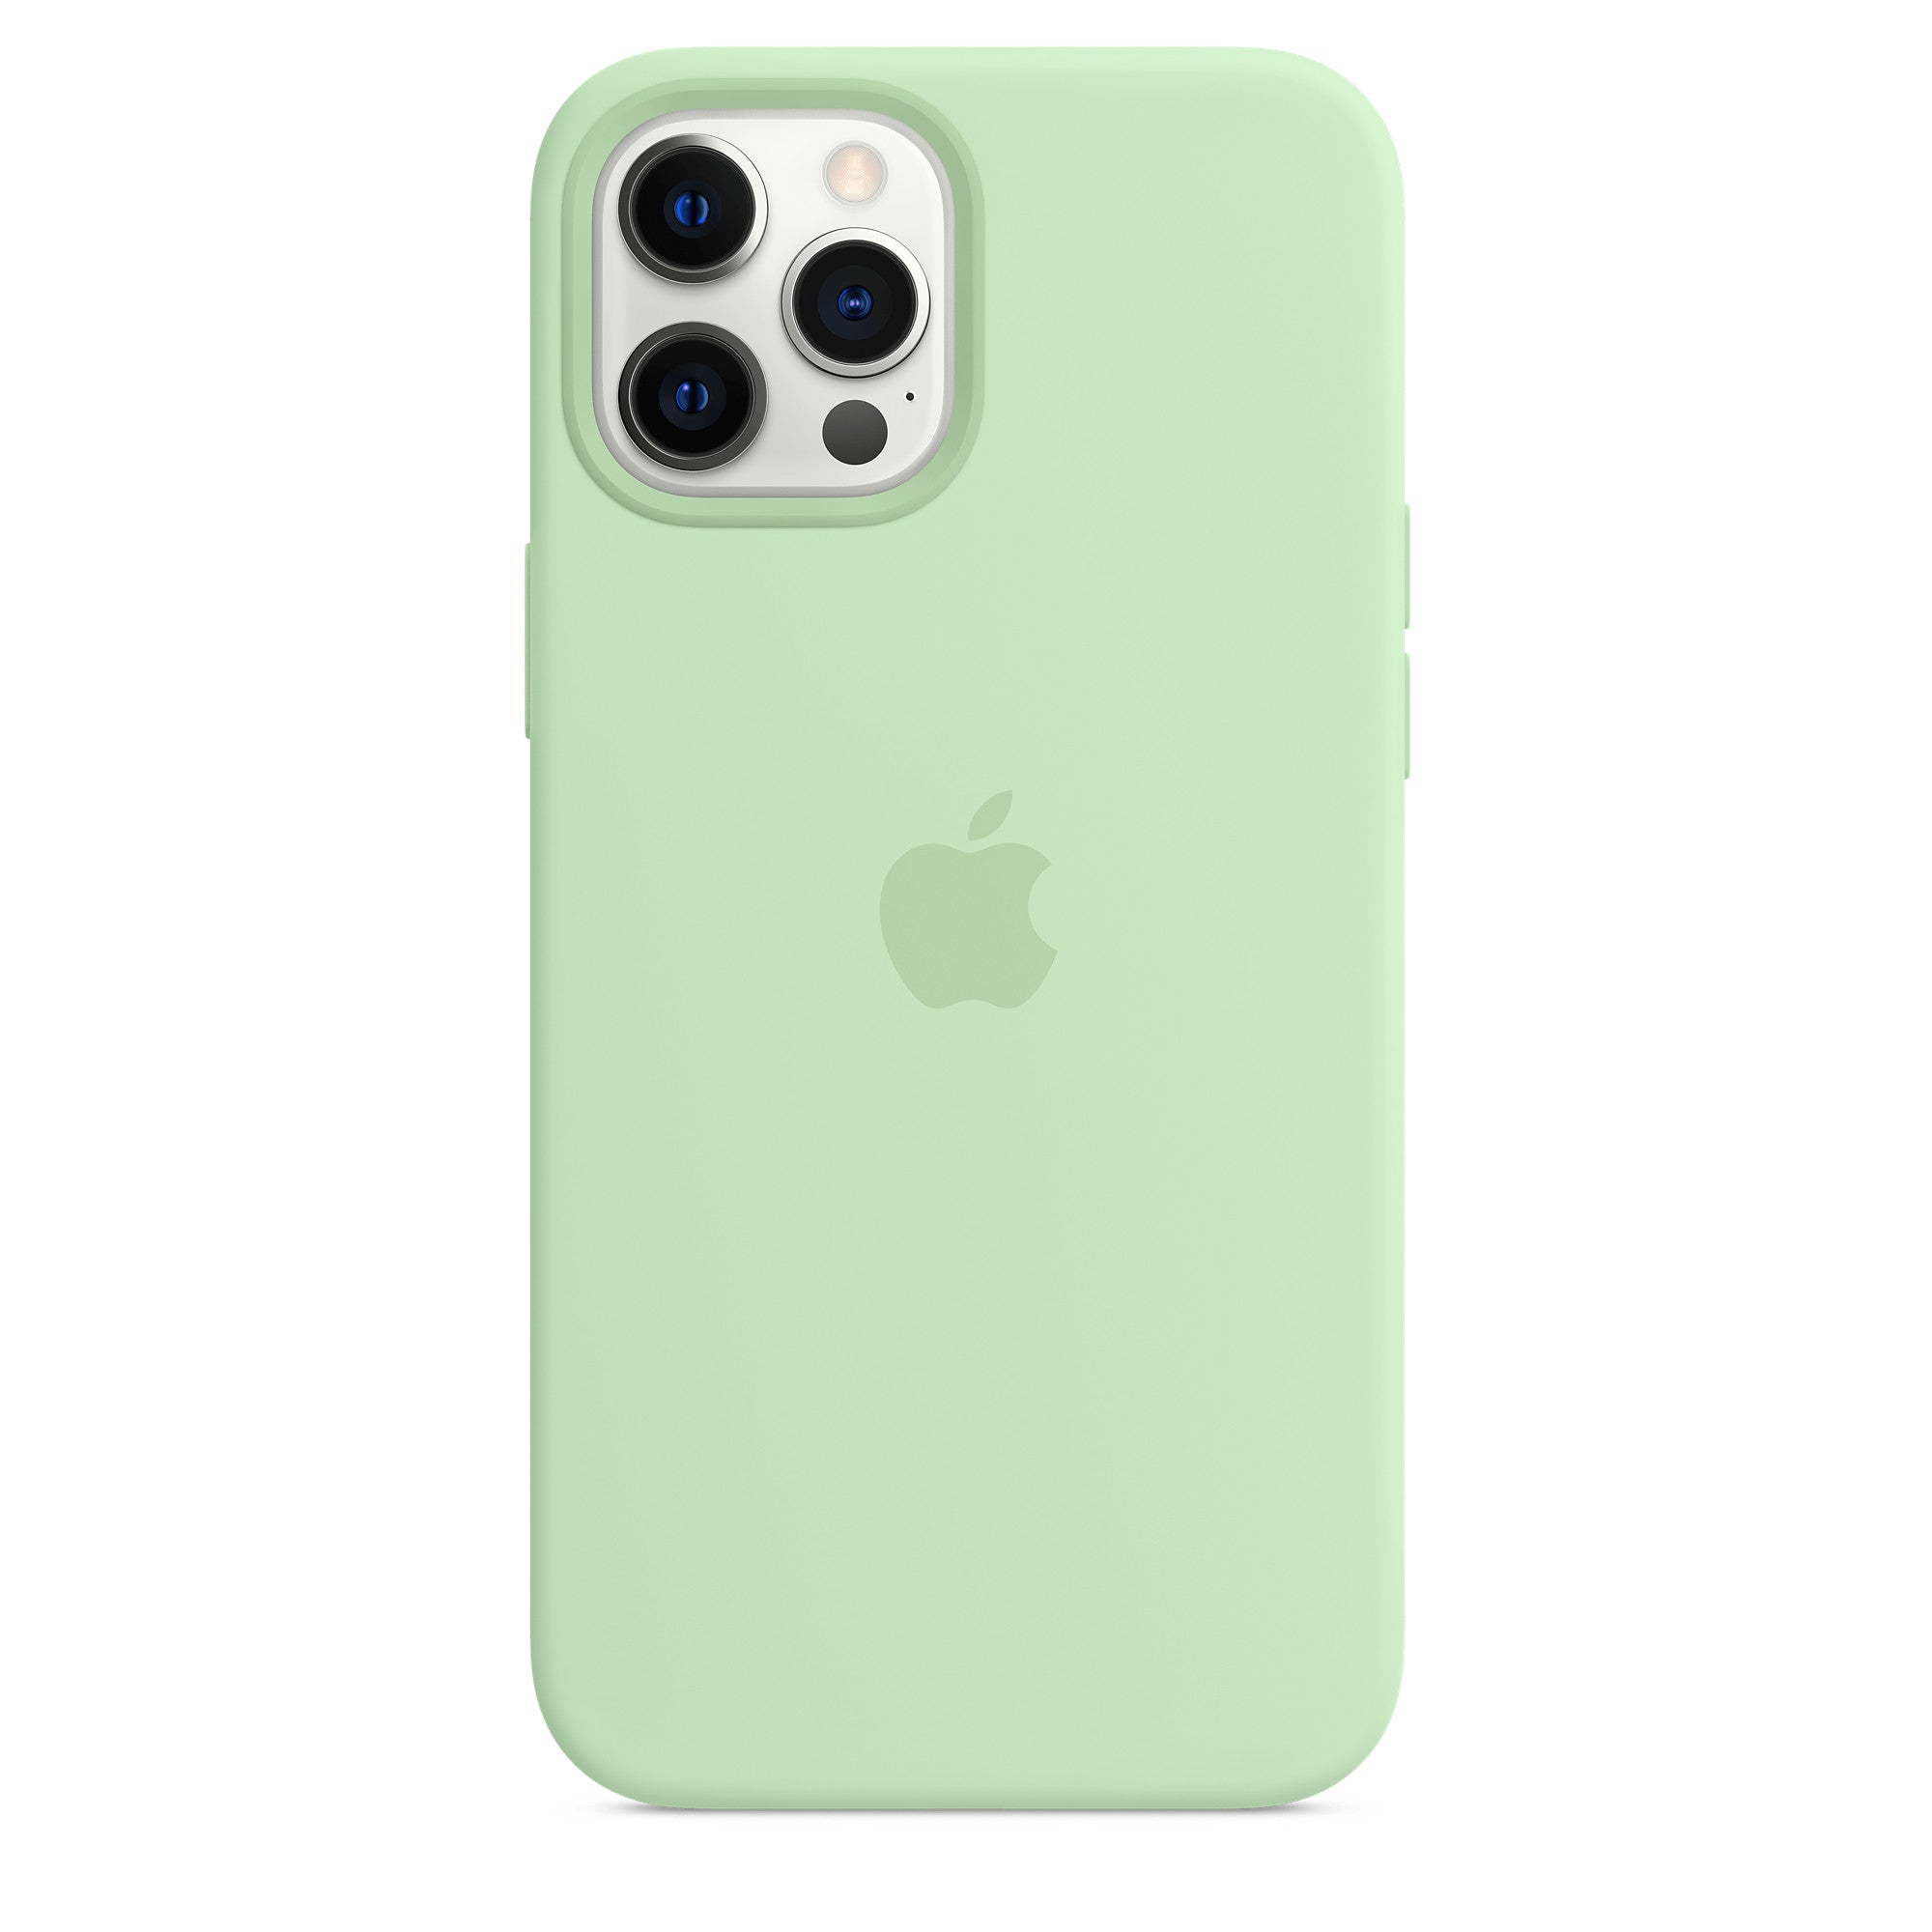 Apple iPhone 12 Pro Max Silicone Case with MagSafe - Pistachio Pistachio New - Sealed